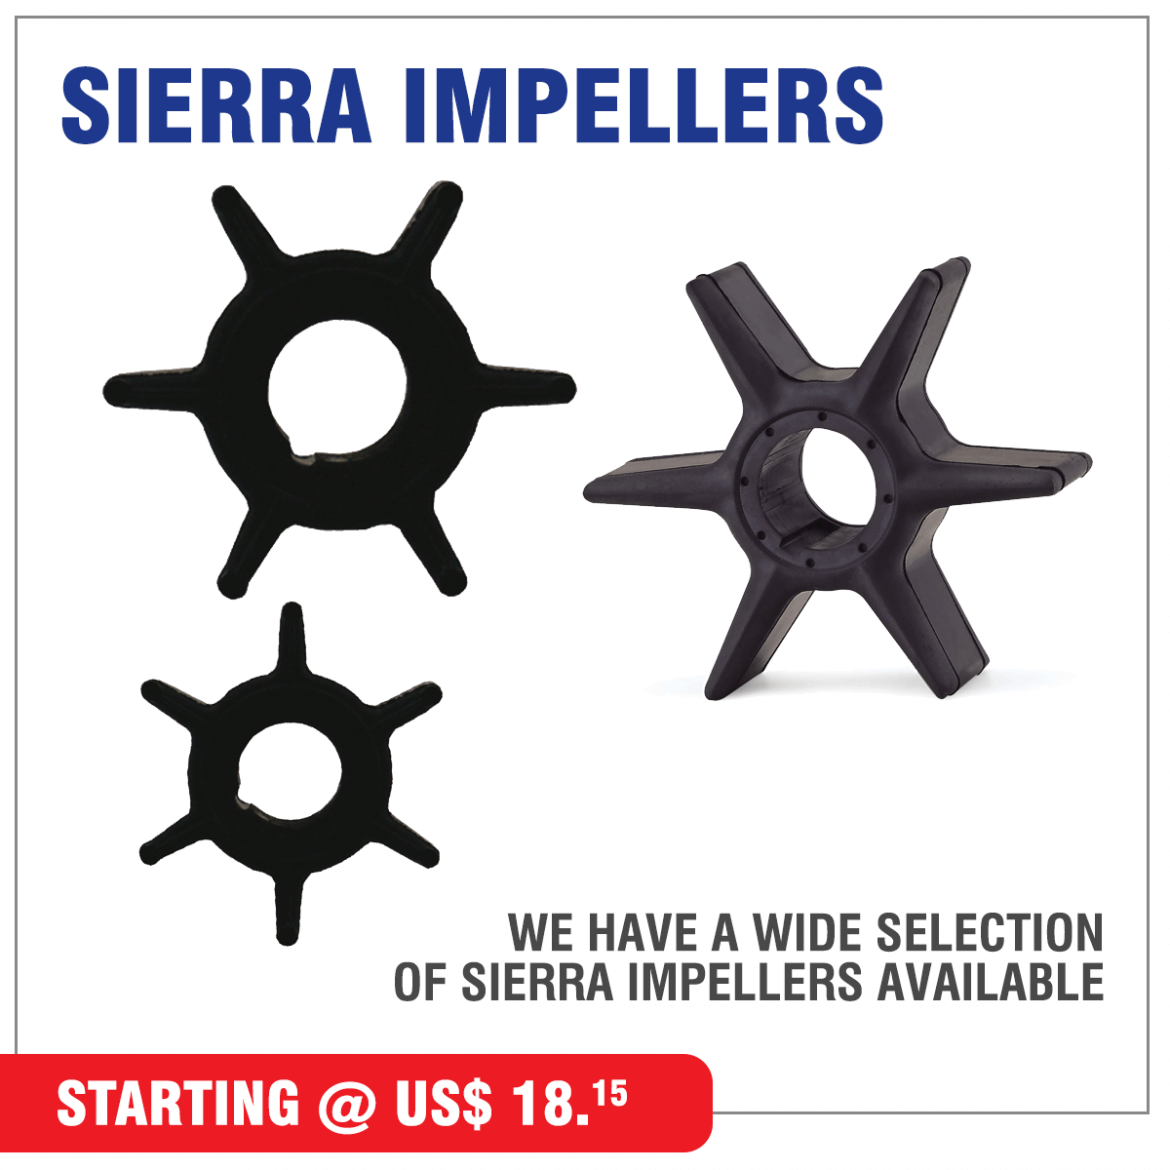 7 Impellers 9